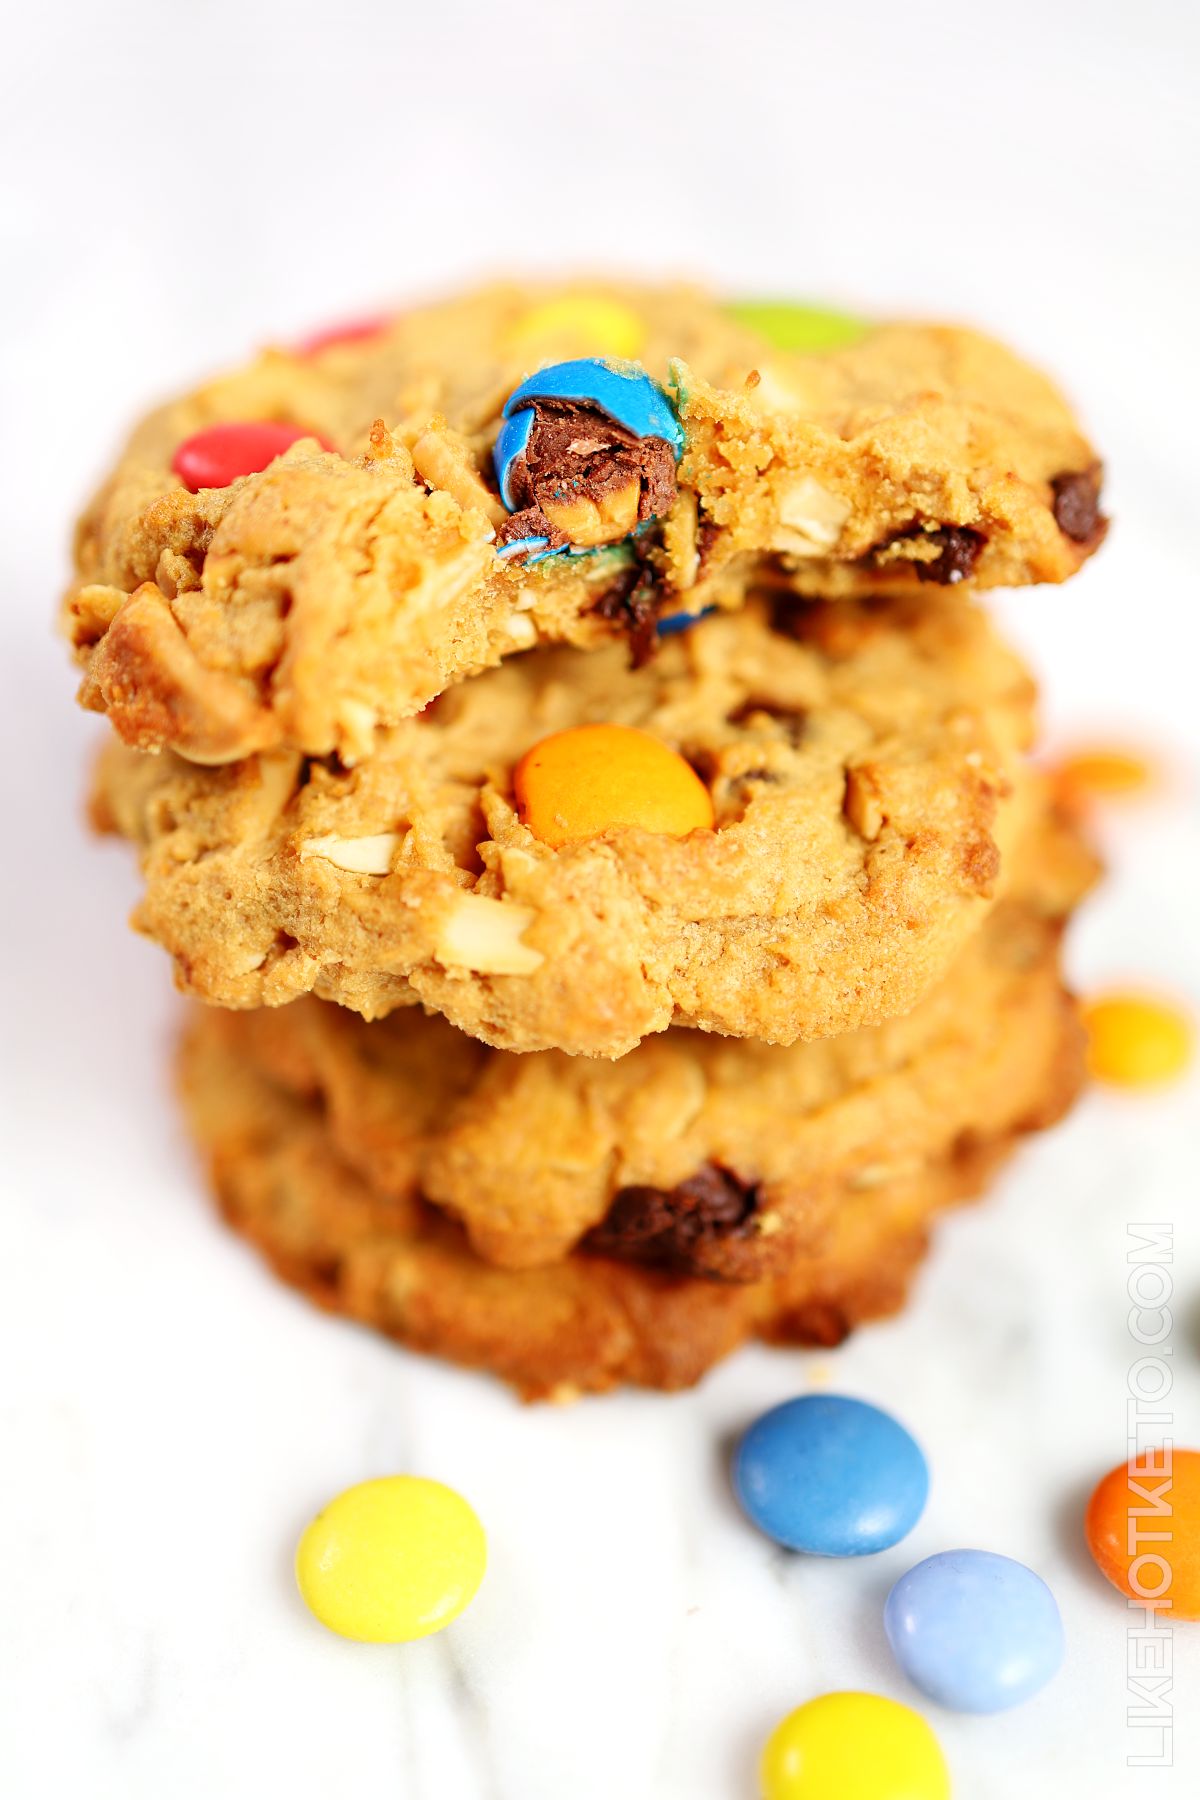 A pile of lupin flour monster cookies with keto M&M's.